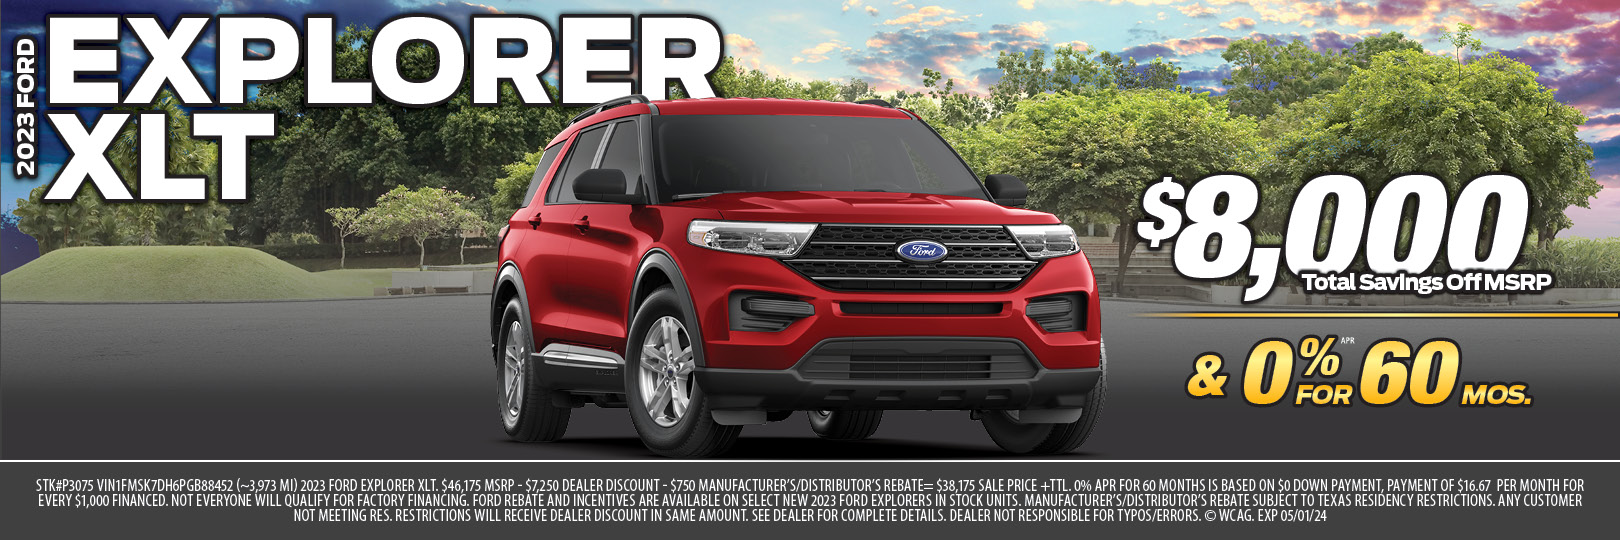 Ford Explorer Specials The Woodland | Spring | Houston